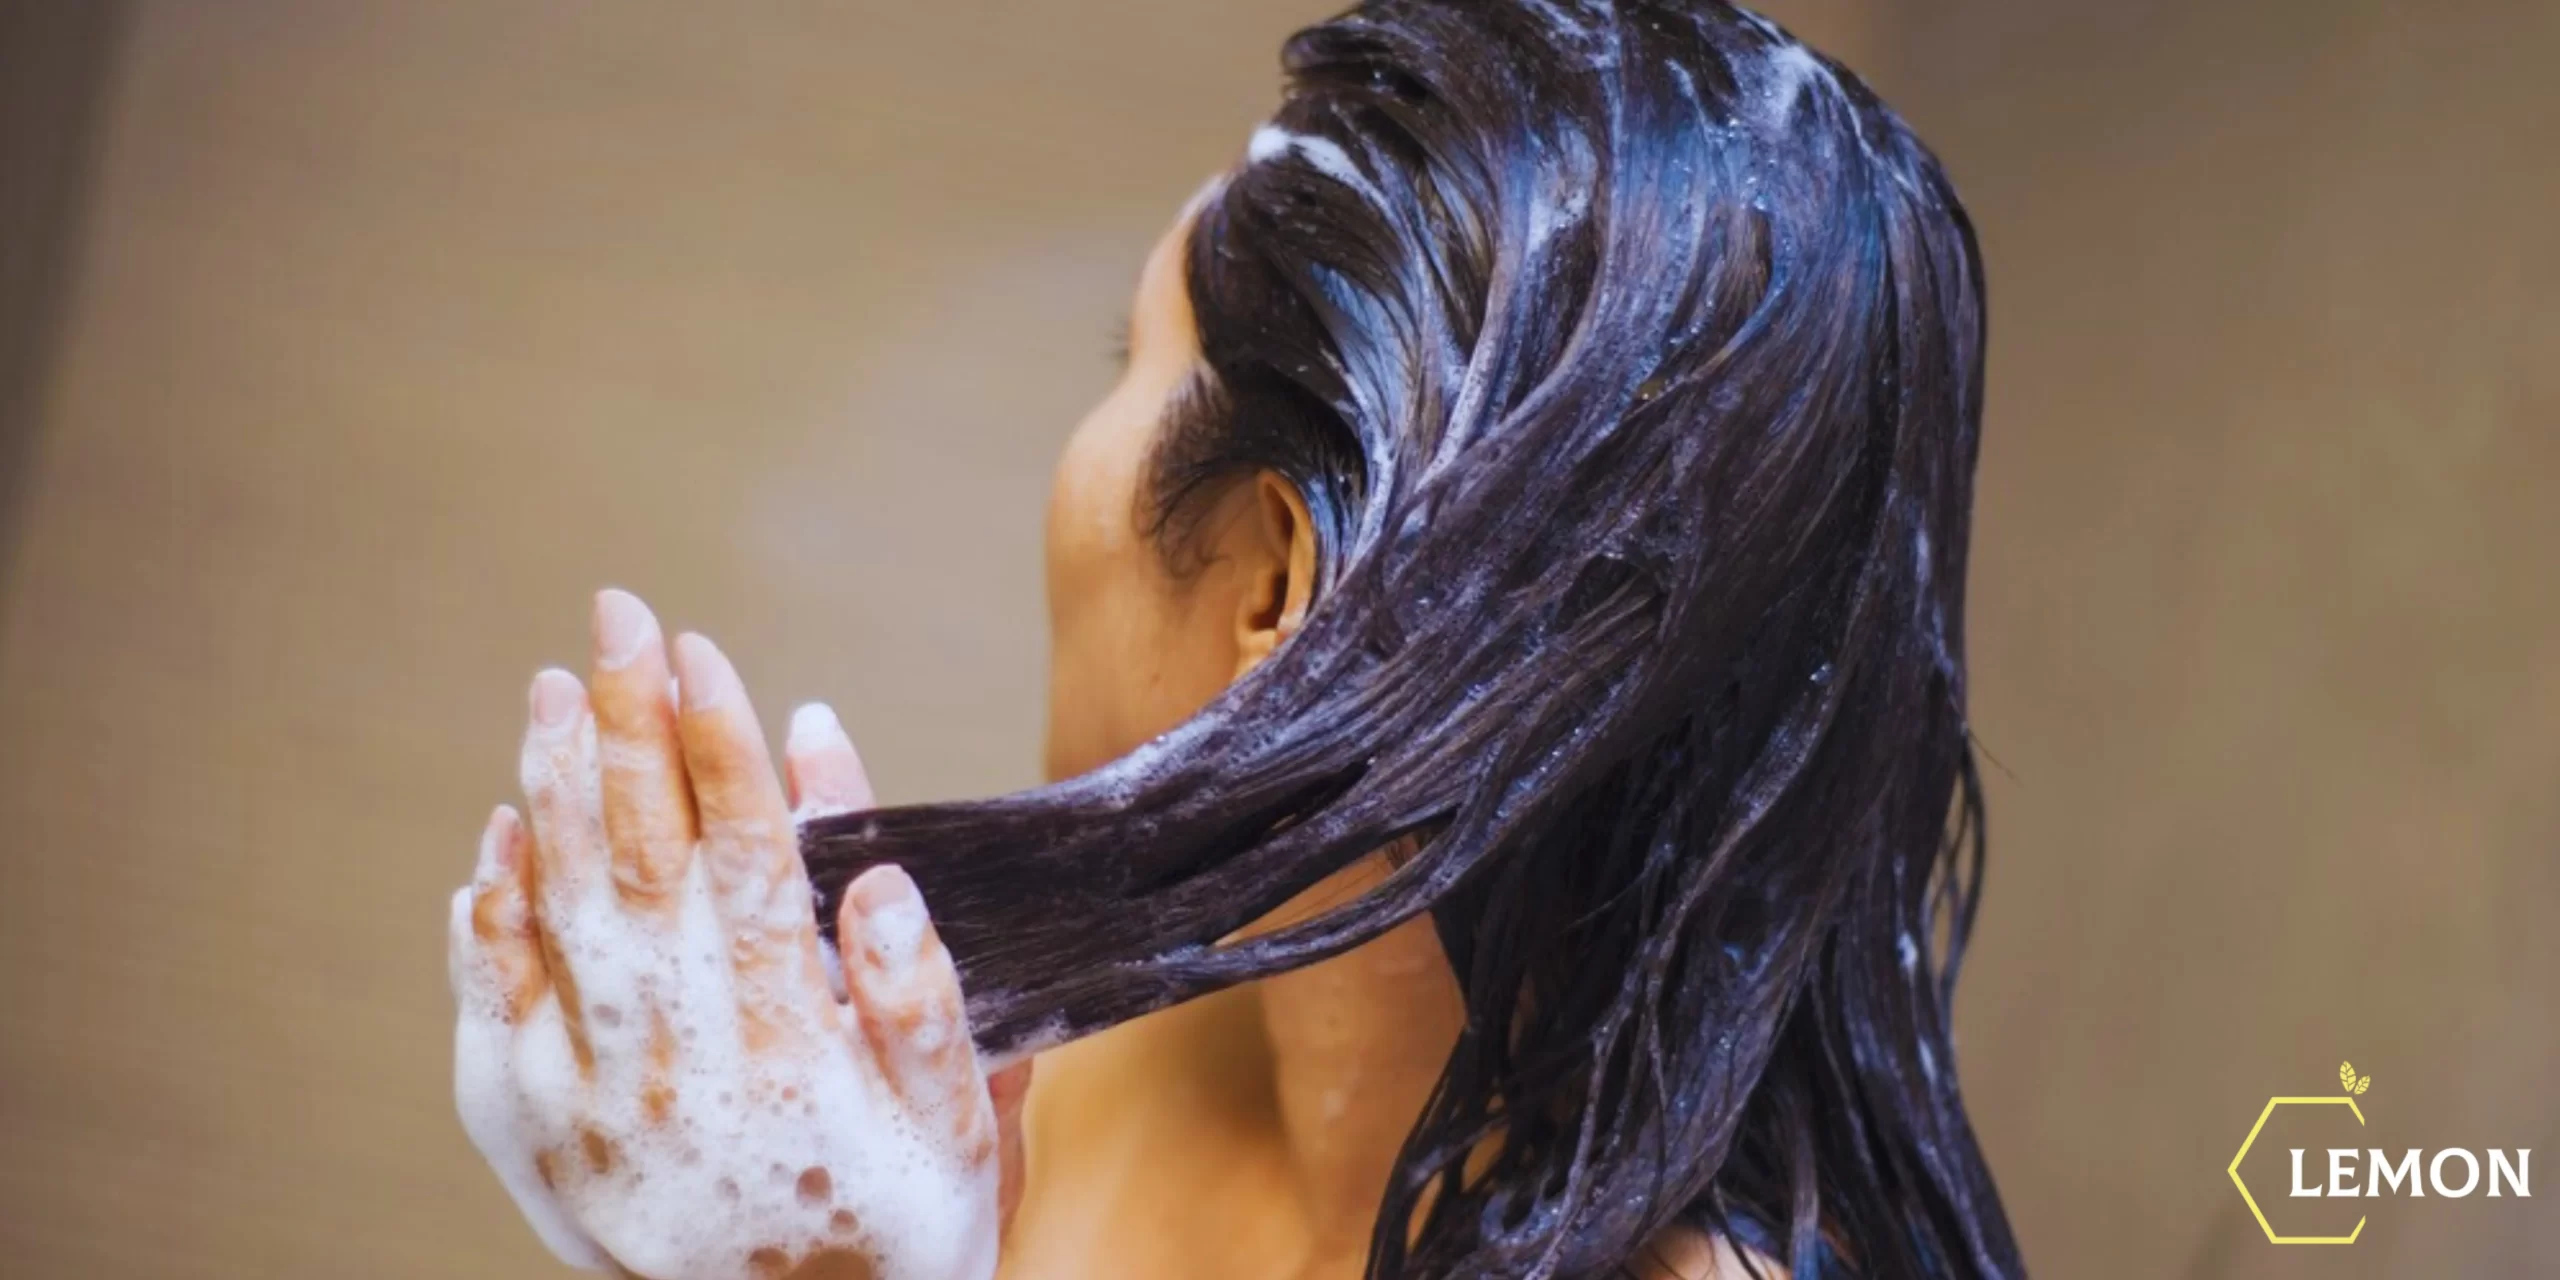 How to Wash and Condition Hair